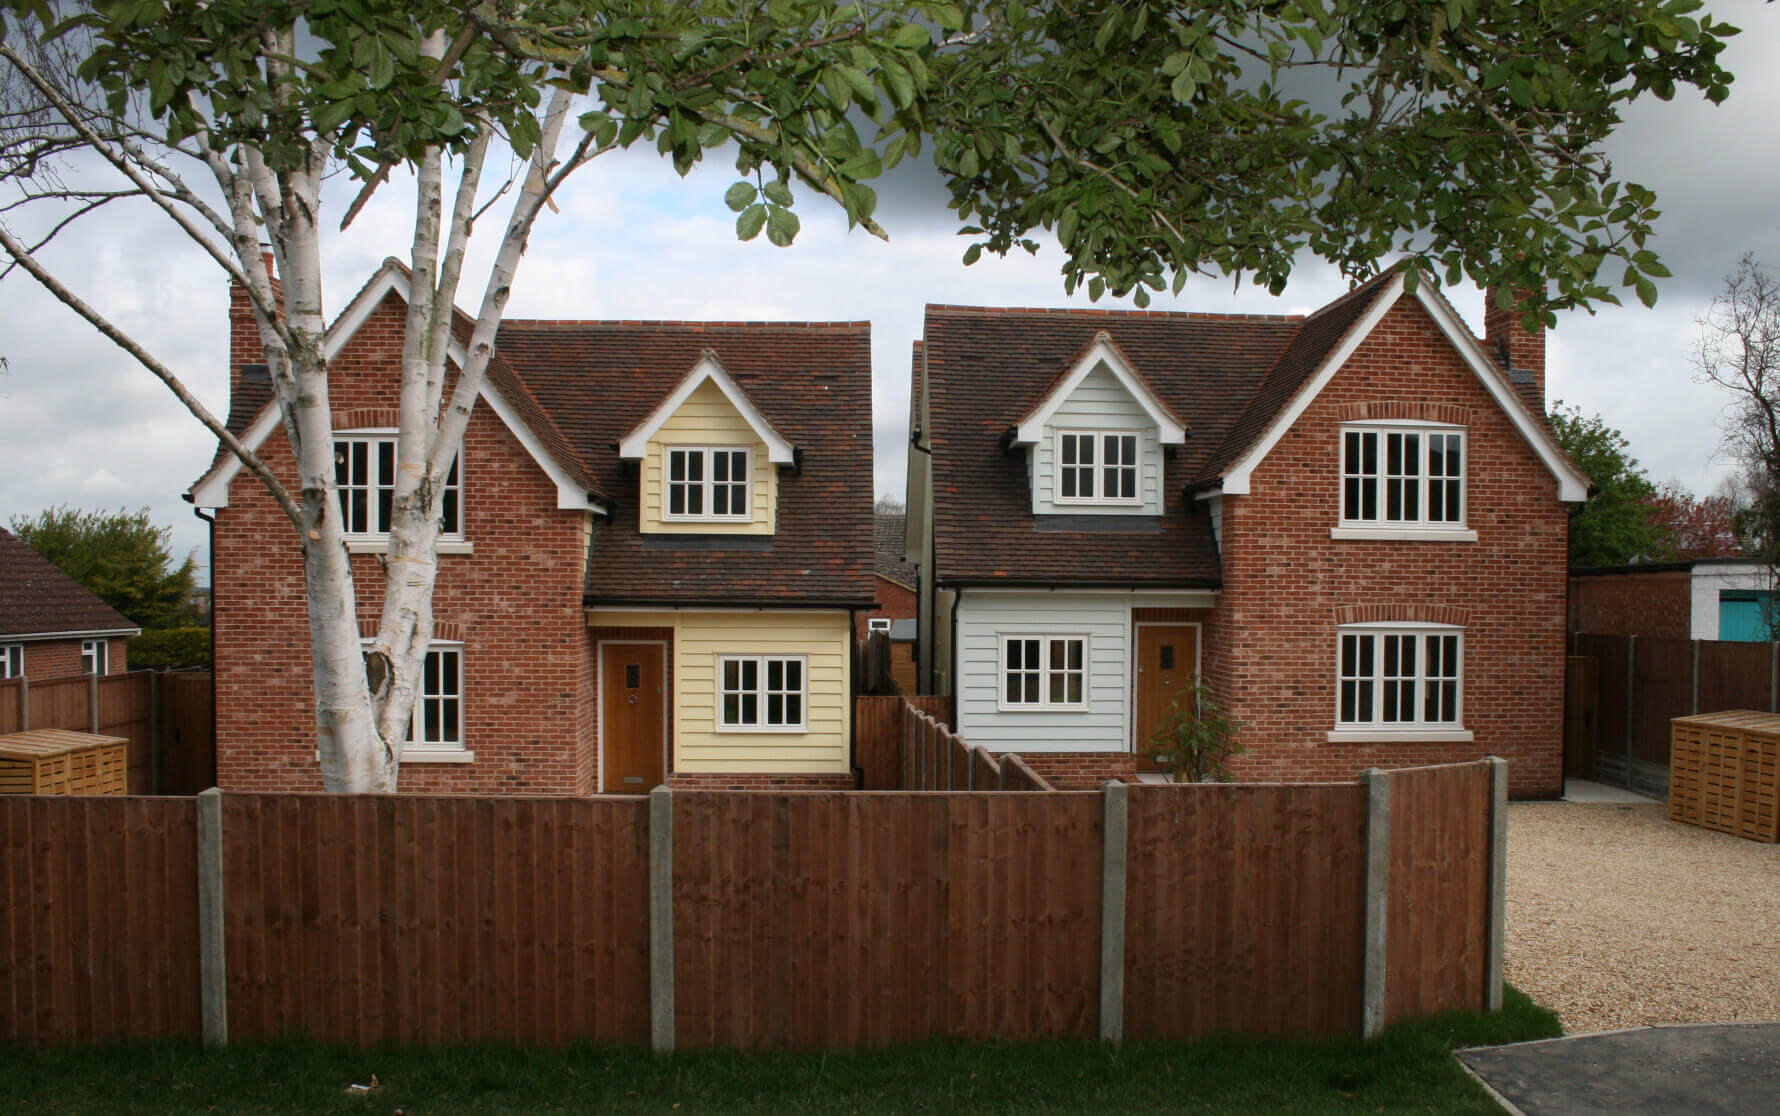 Front view of the two detached houses in the Hilltop Lane development